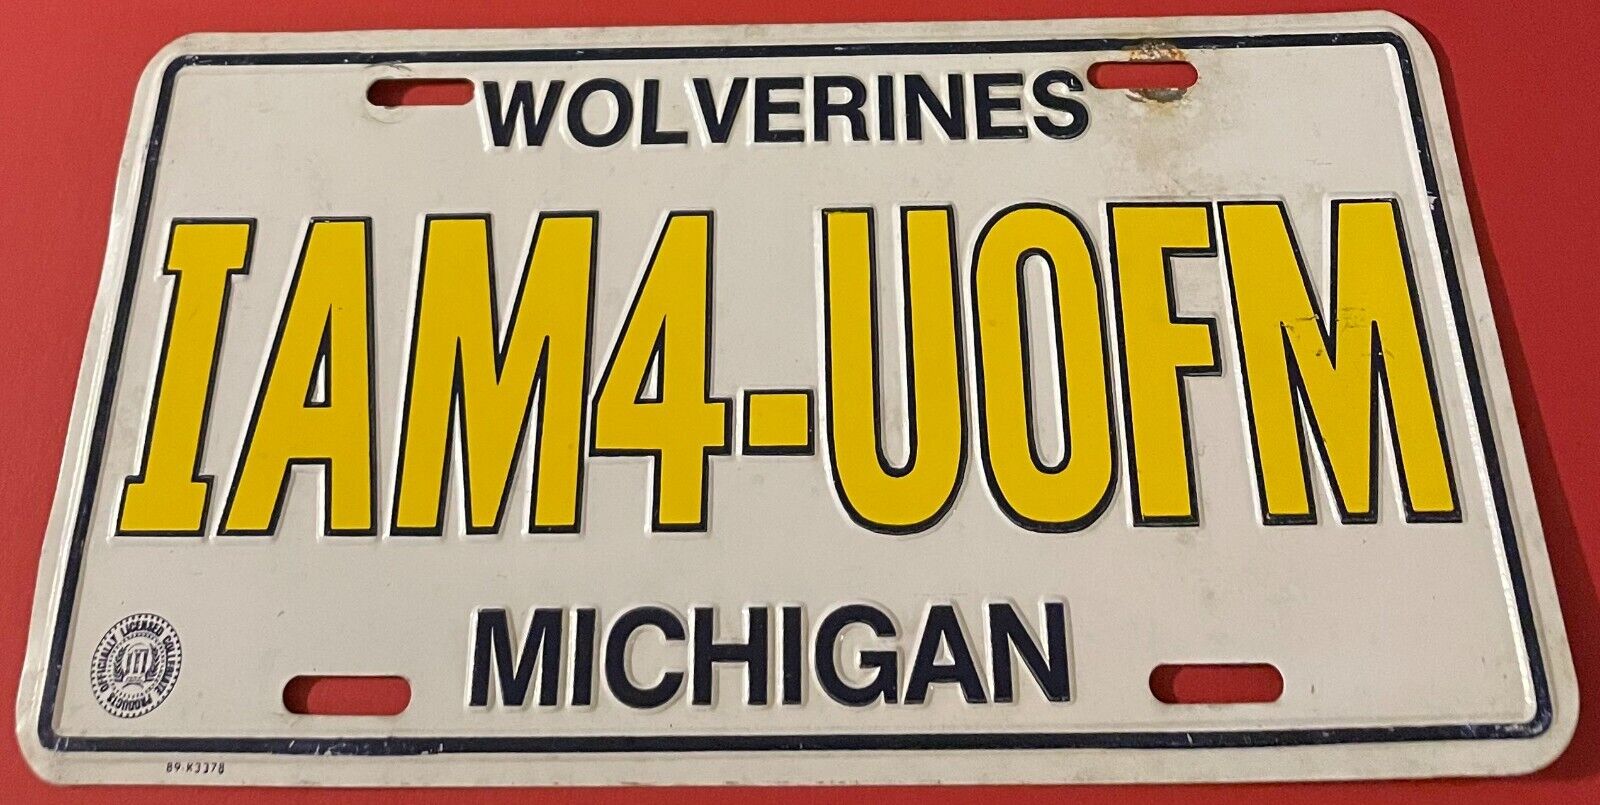 University of Michigan Wolverines Booster License Plate IAM4 UOFM